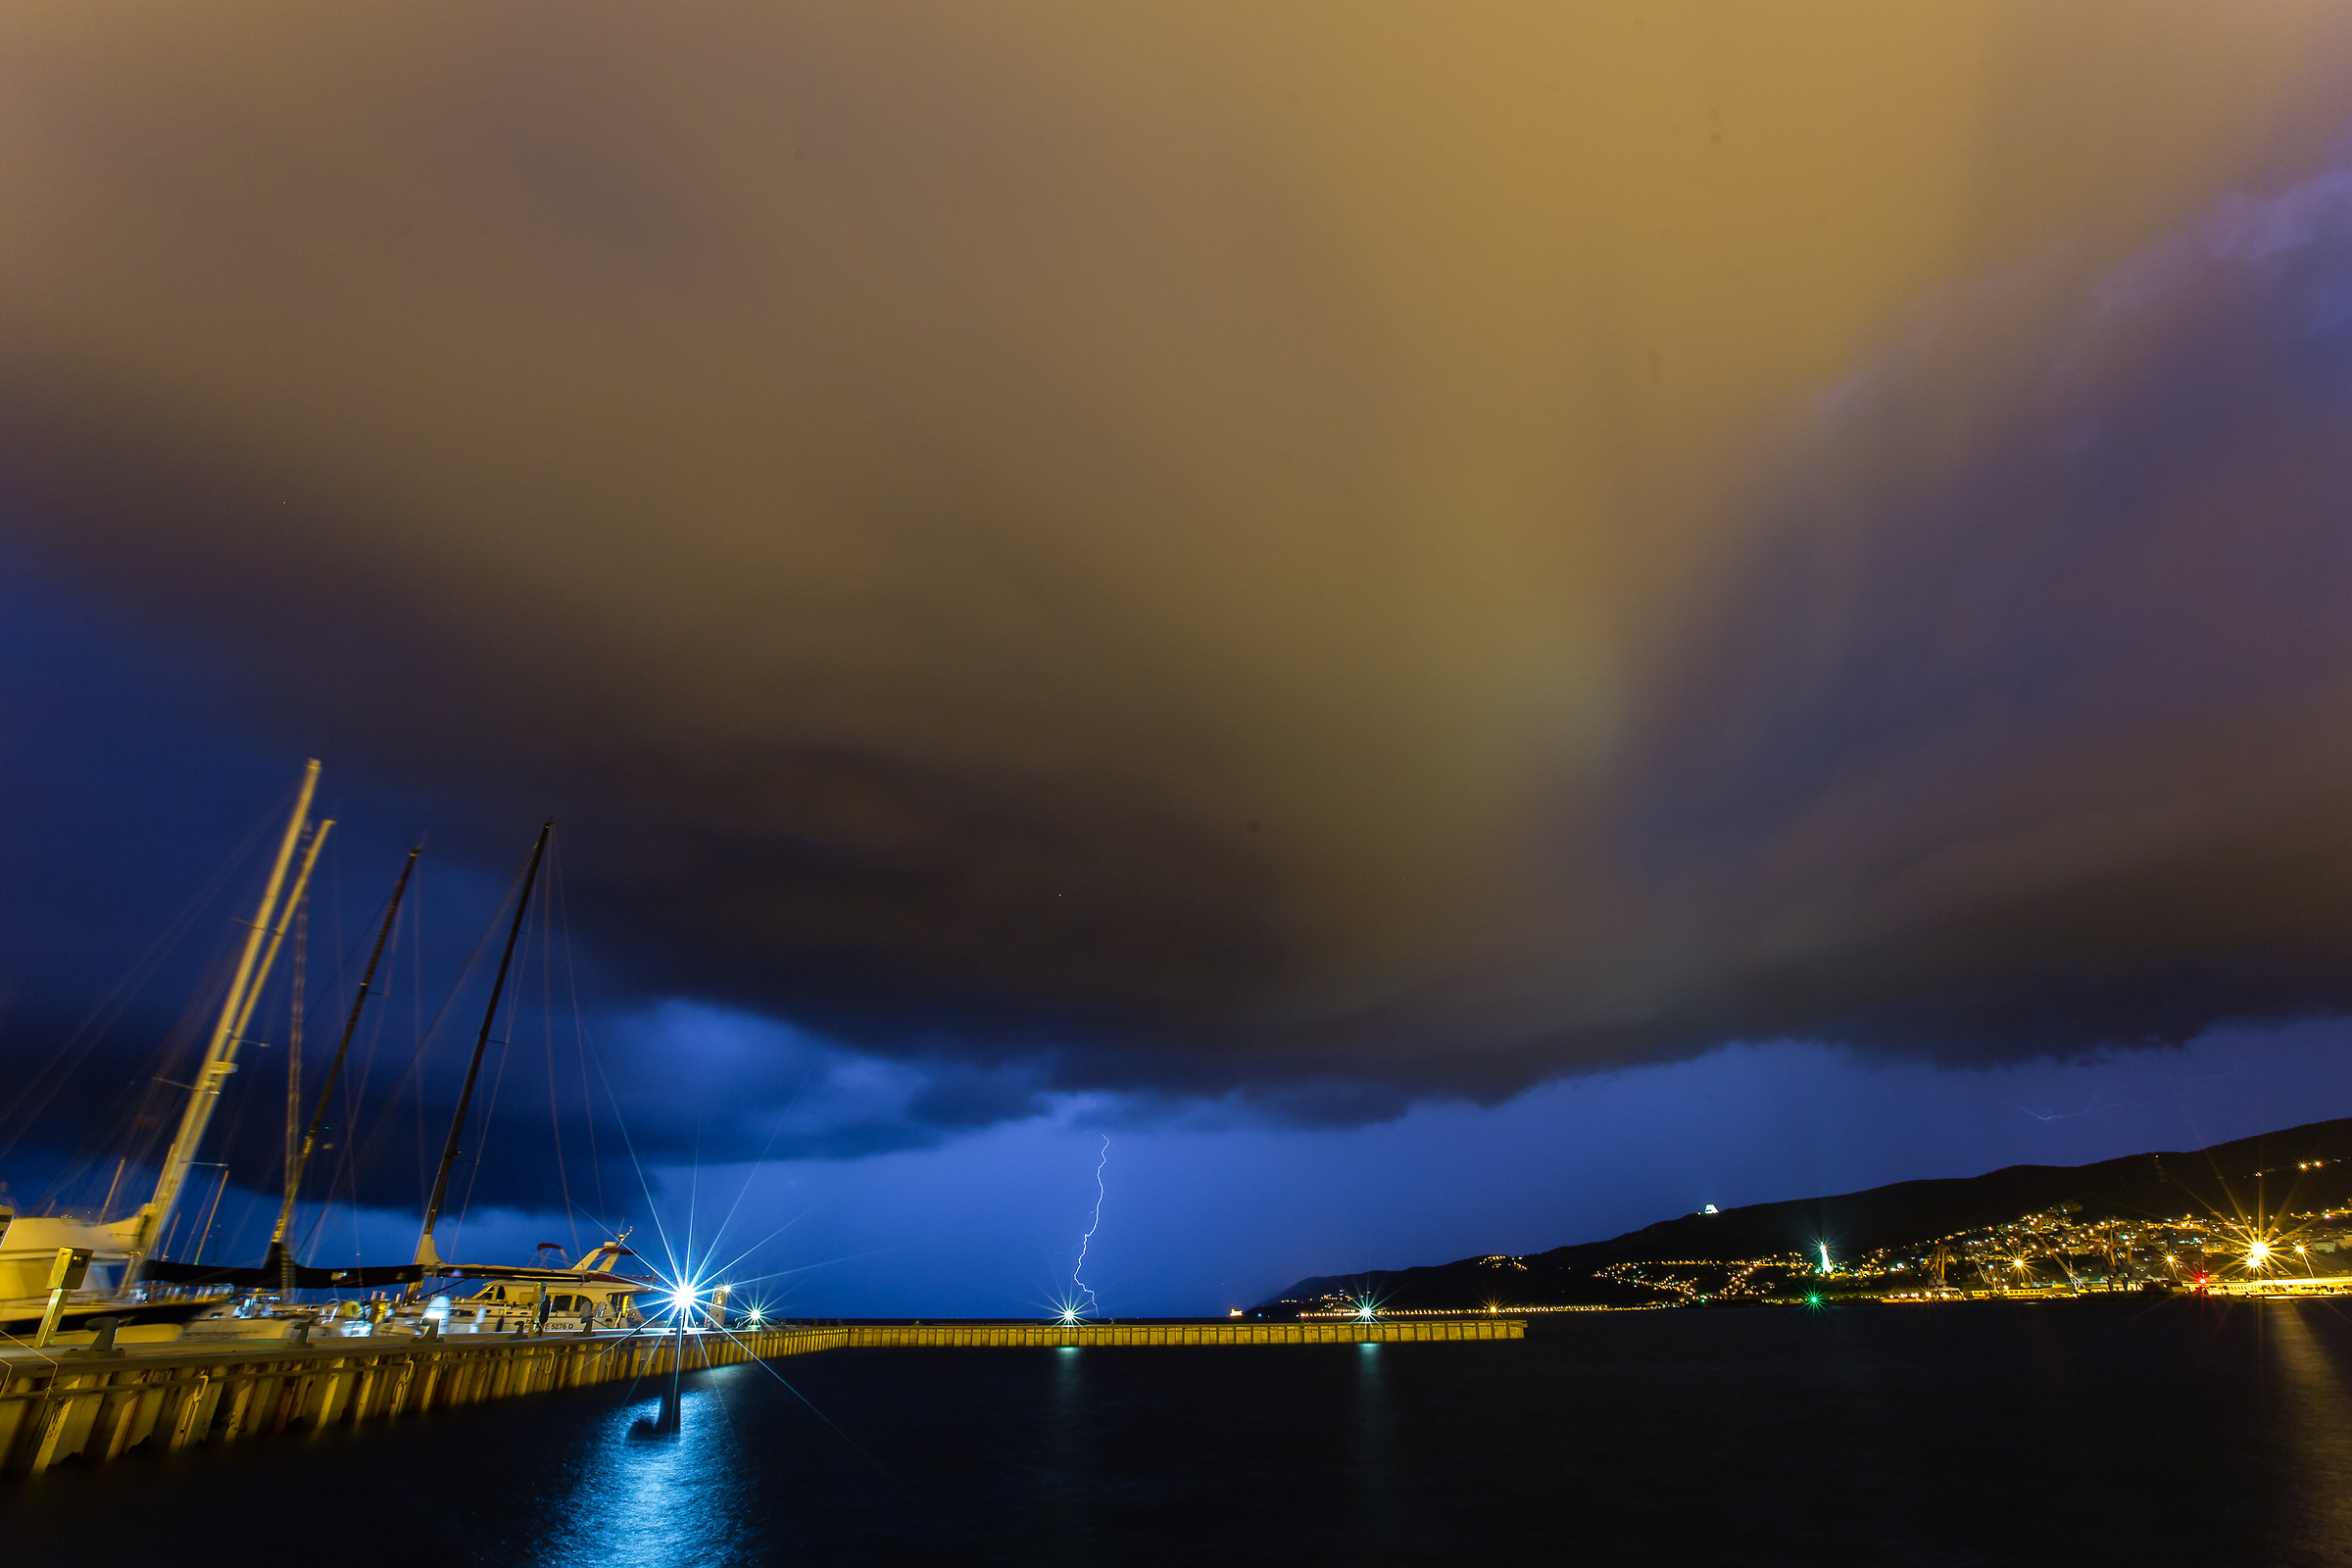 In Trieste before the storm...